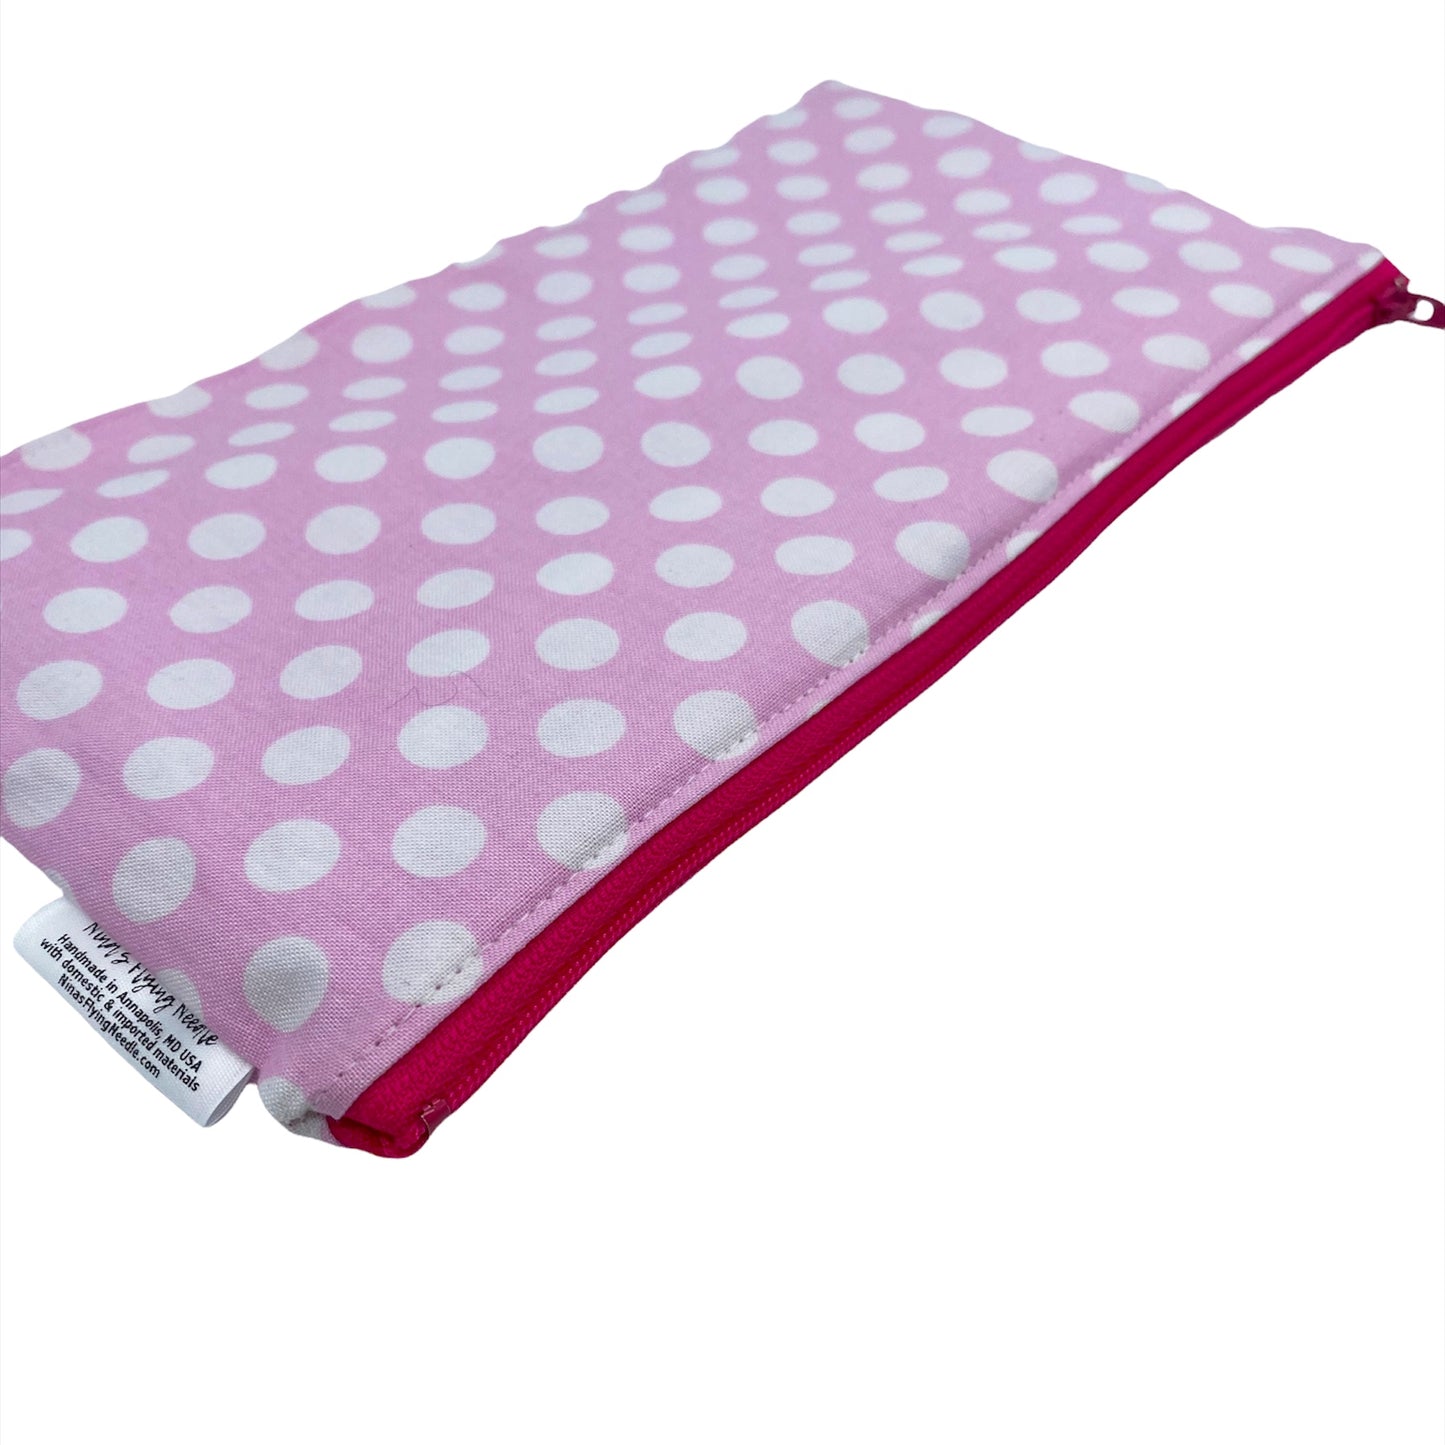 Travel Pouch Sized Wet Bag Polka Dots Pink